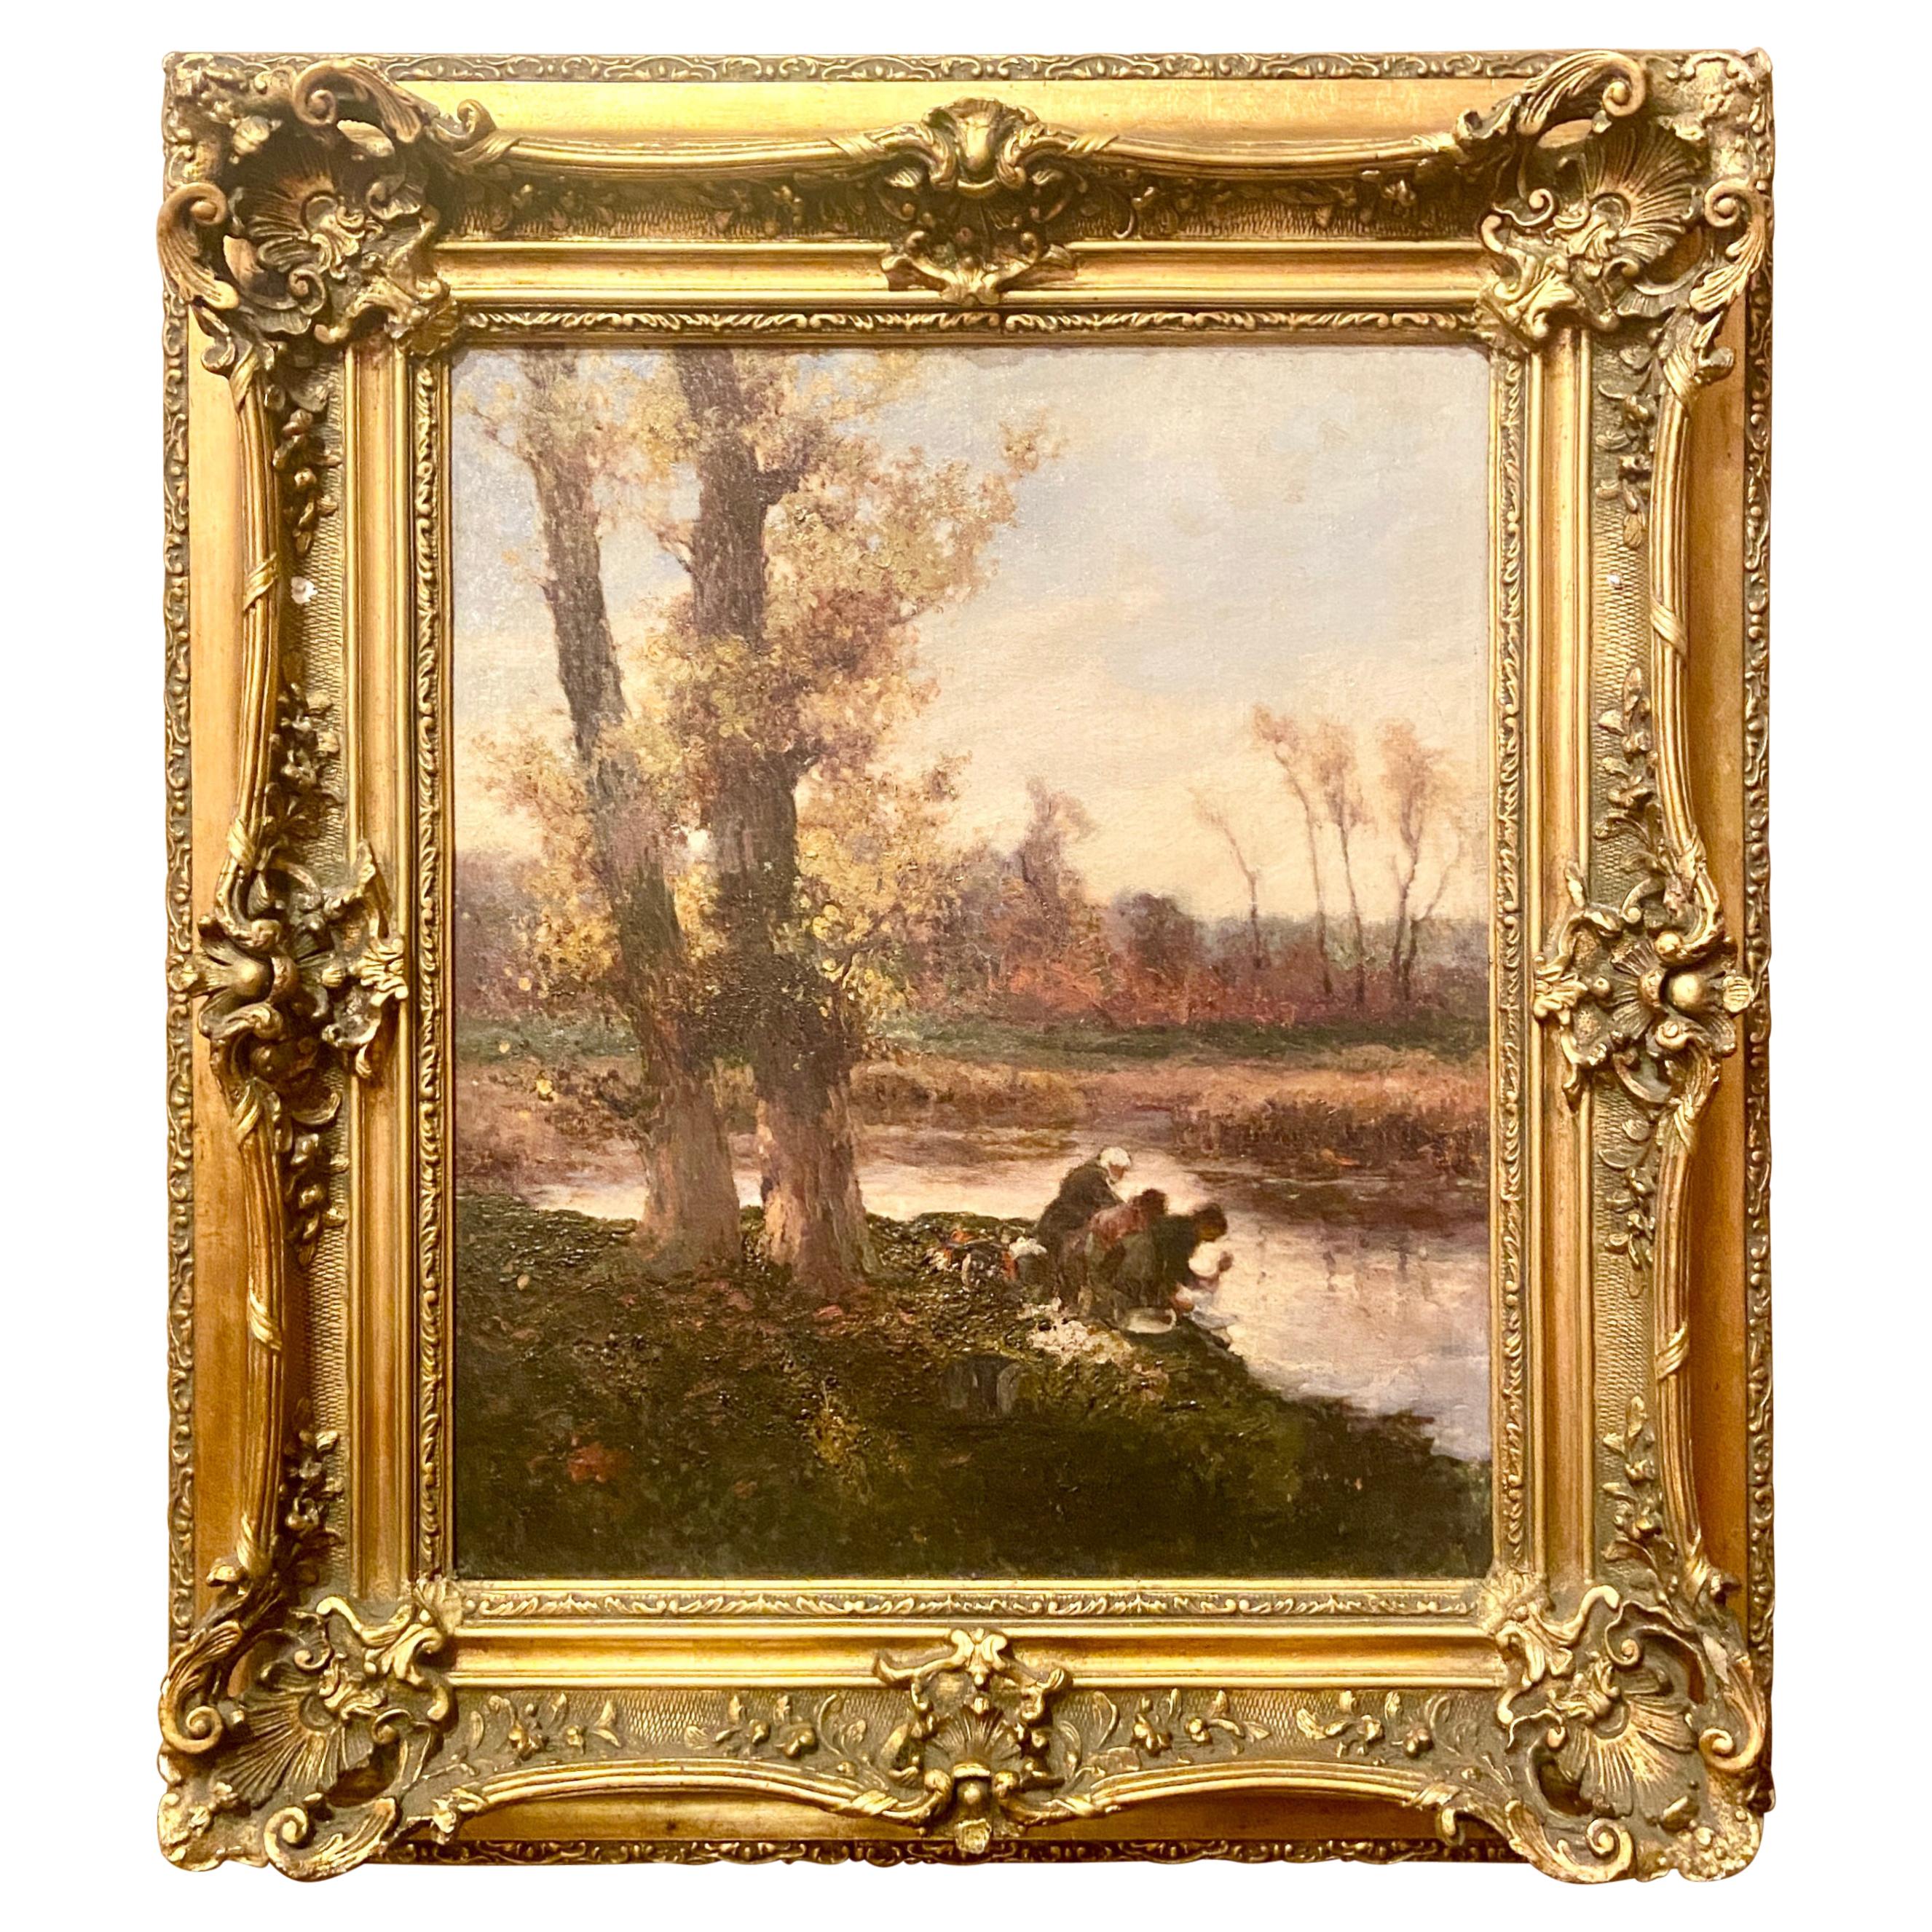 Antique 19th Century French Oil on Canvas, "Washing Clothes Along The Shore."